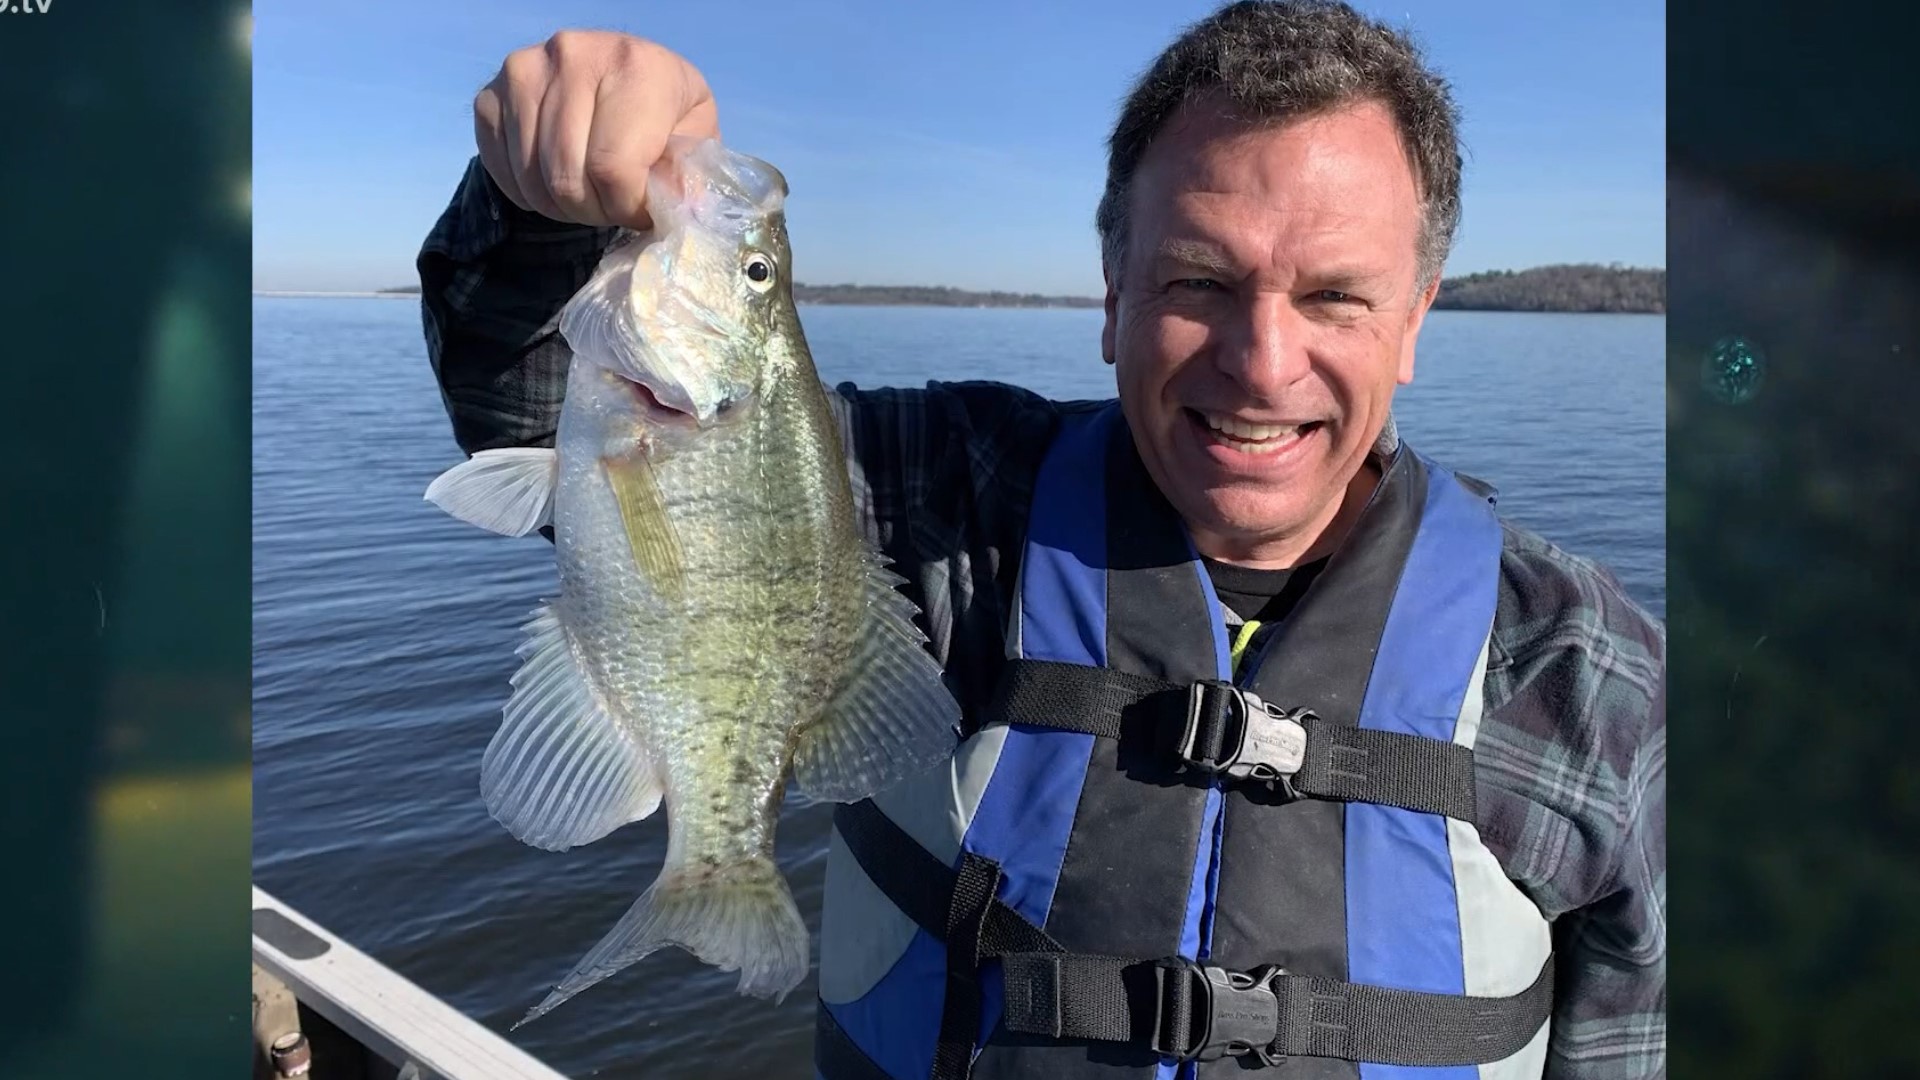 In this week's Hooked on East Texas, we go crappie fishing on Lake Palestine with guide Mark Standridge.